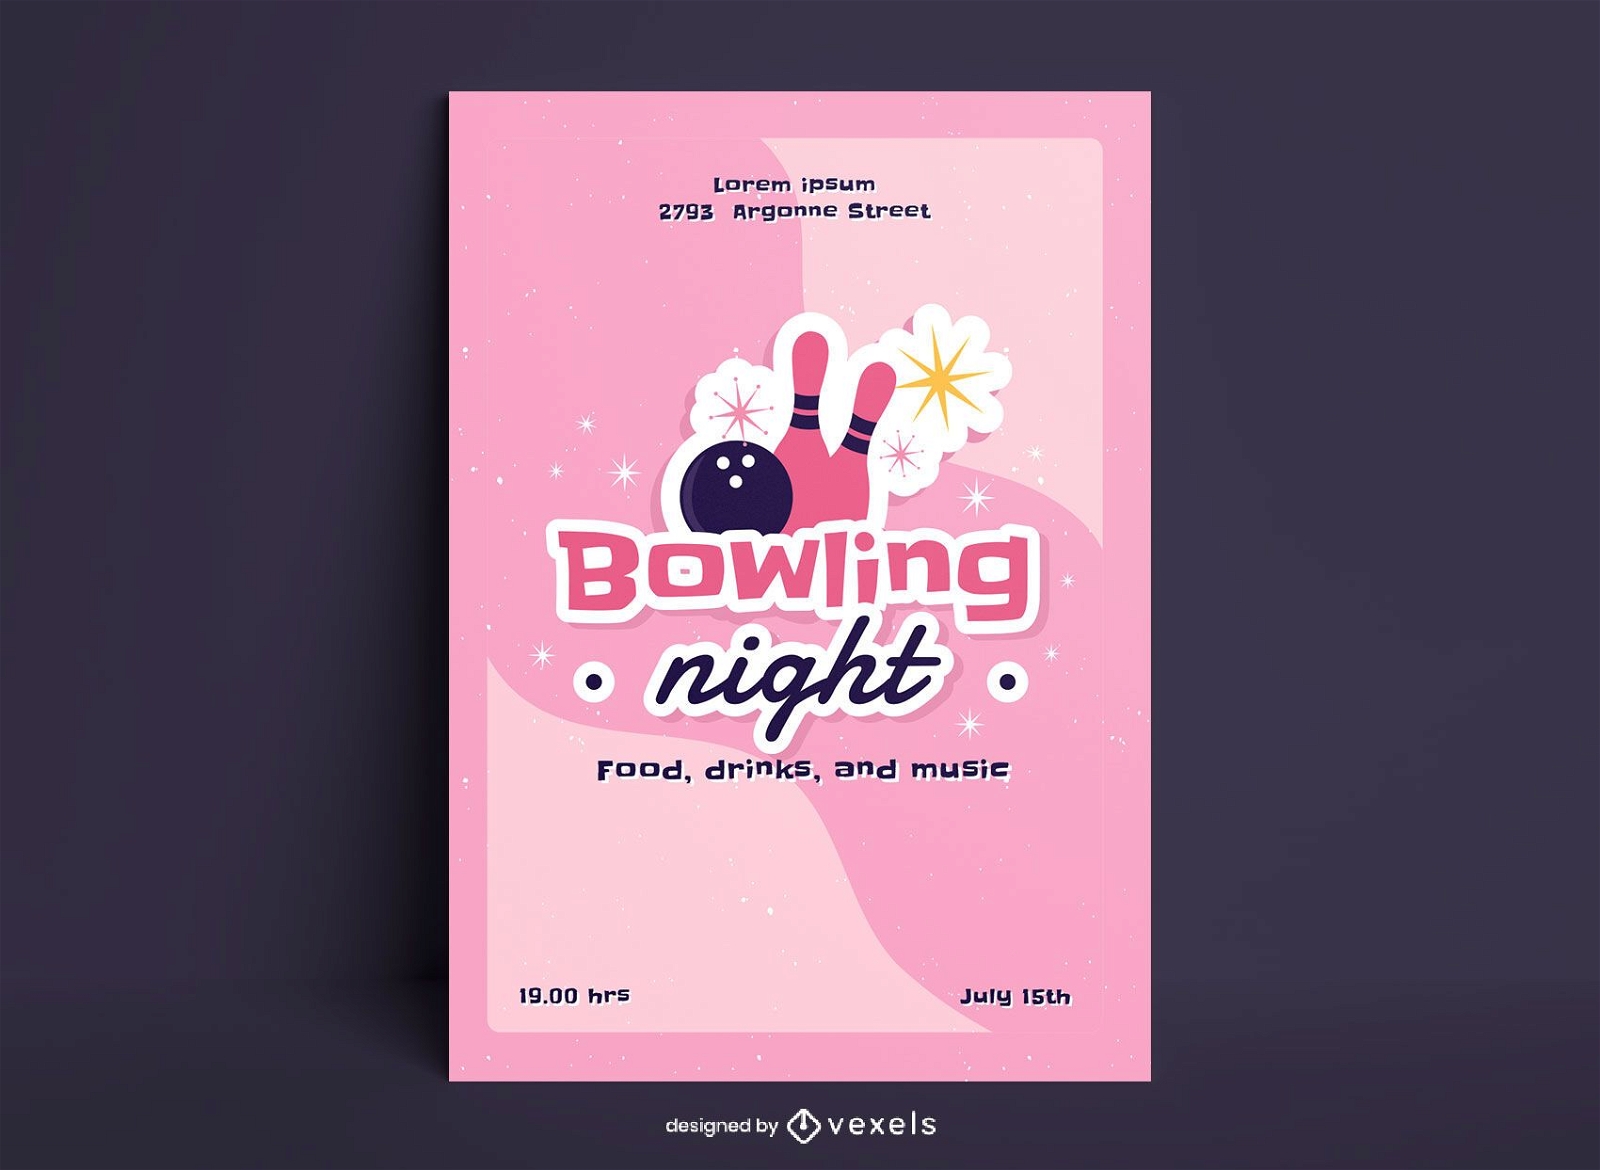 Bowling night sticker style poster design